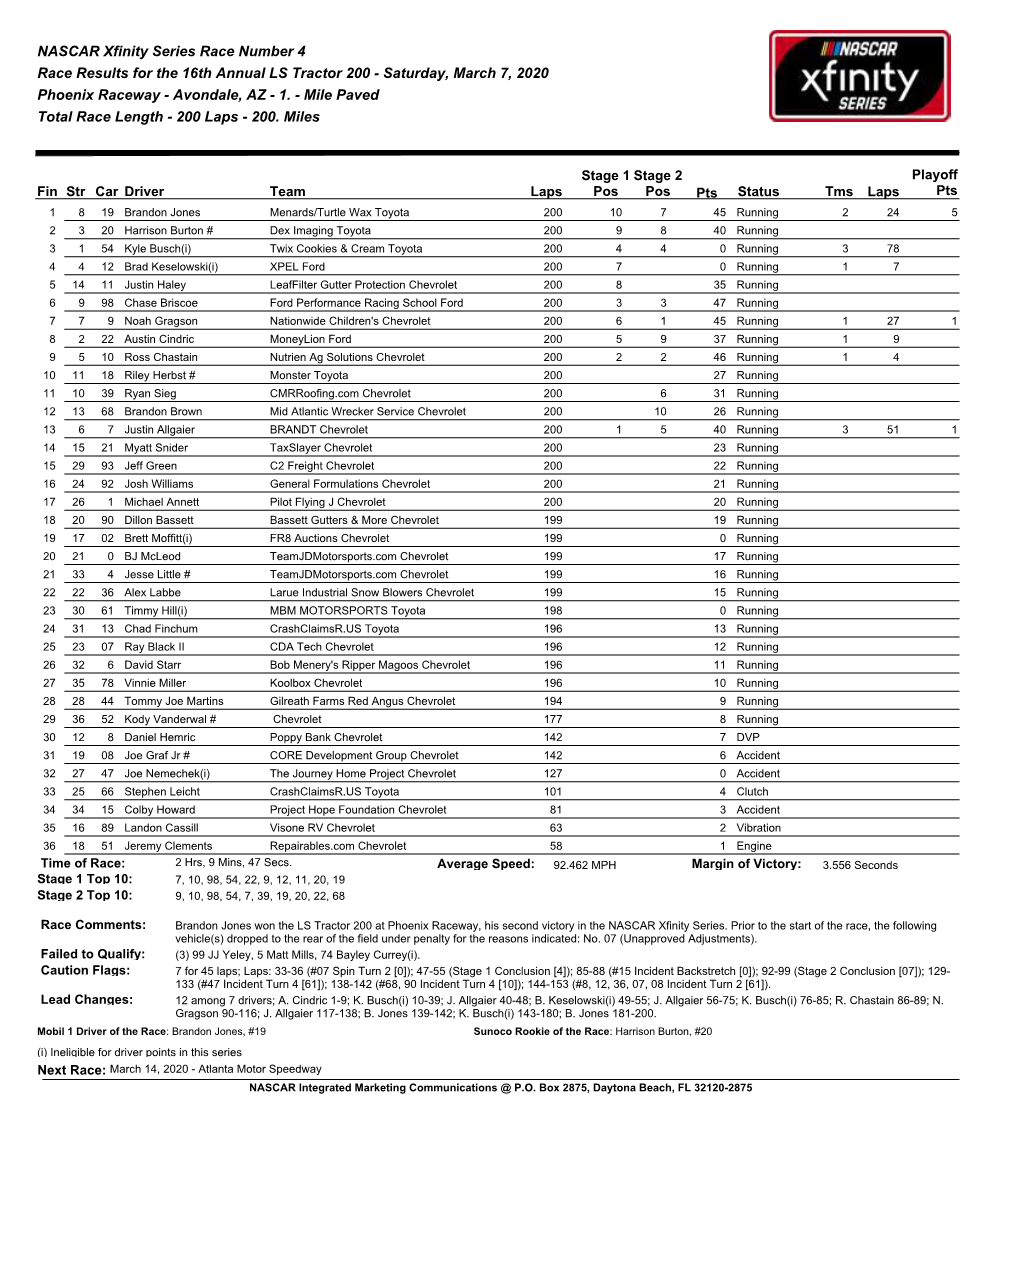 NASCAR Xfinity Series Race Number 4 Race Results for the 16Th Annual LS Tractor 200 - Saturday, March 7, 2020 Phoenix Raceway - Avondale, AZ - 1